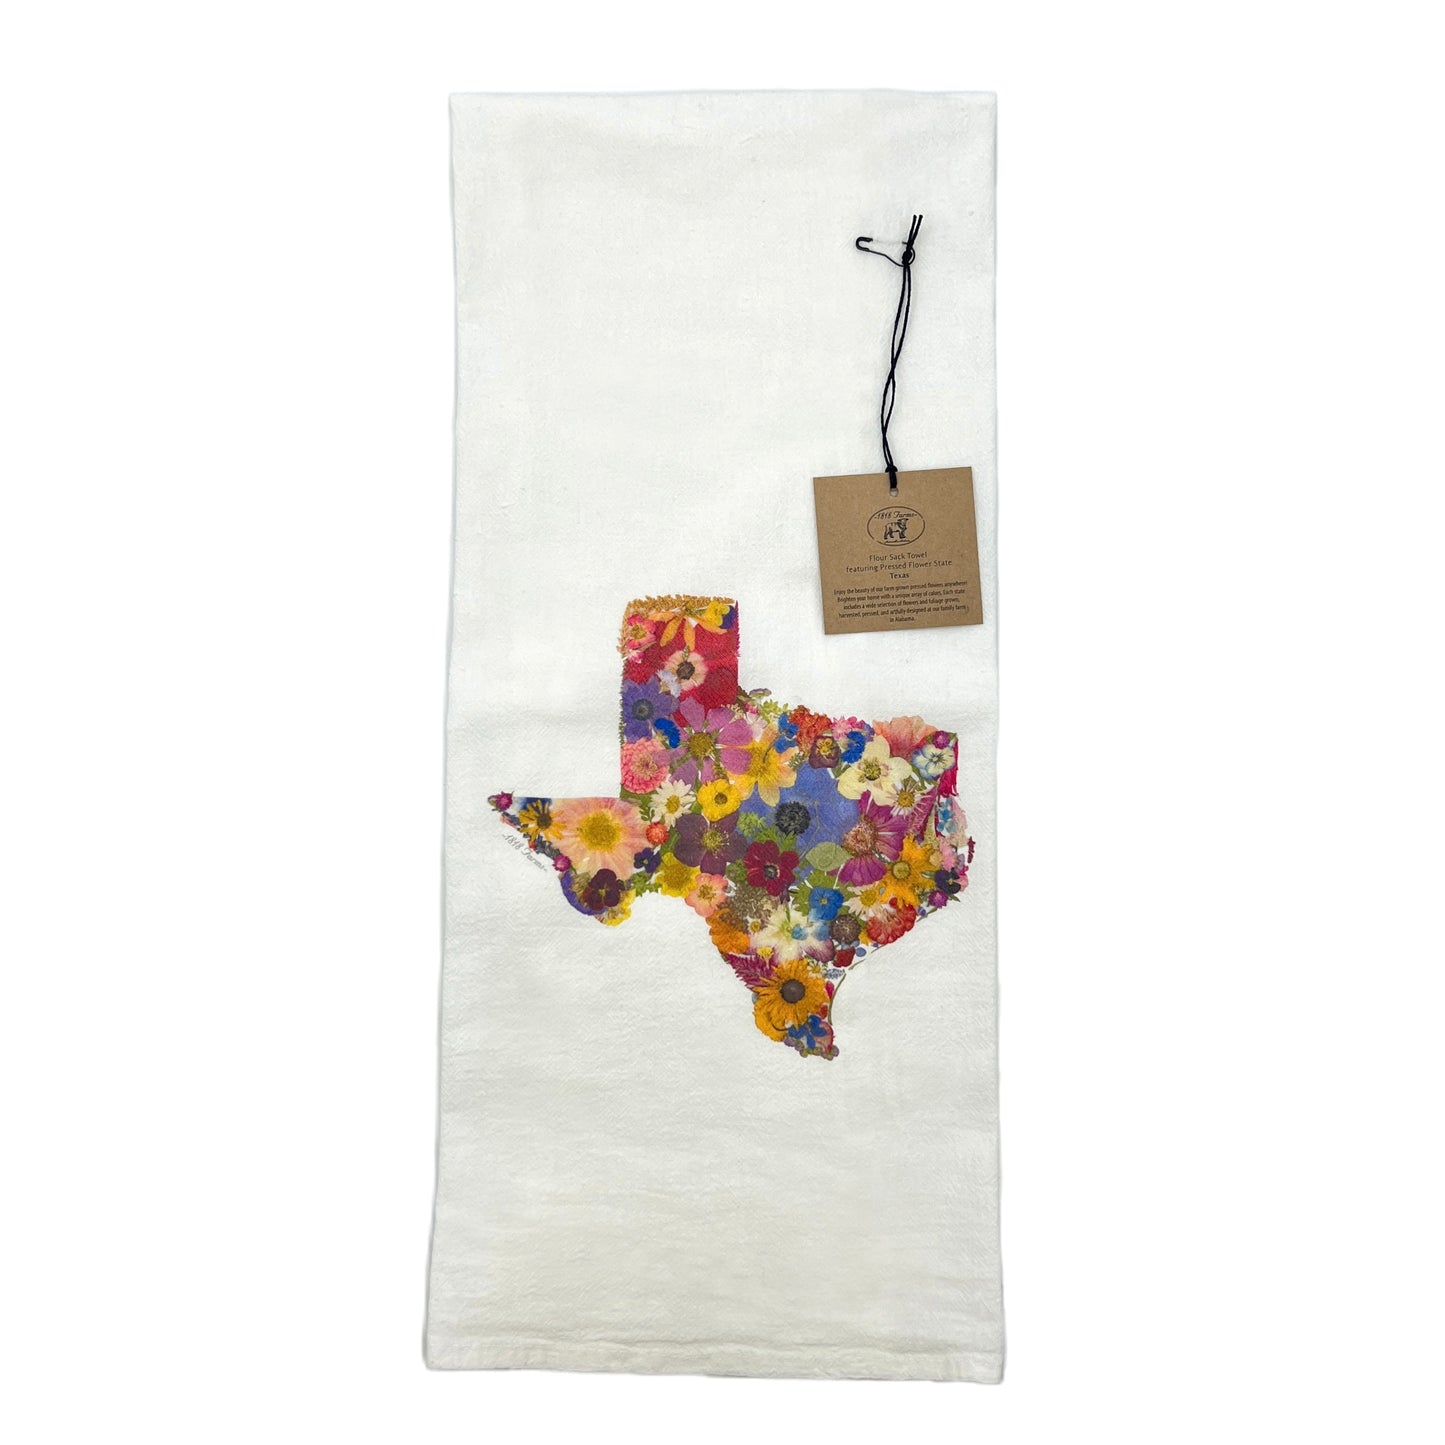 State Themed Flour Sack Towel  - "Where I Bloom" Collection Towel 1818 Farms Texas  